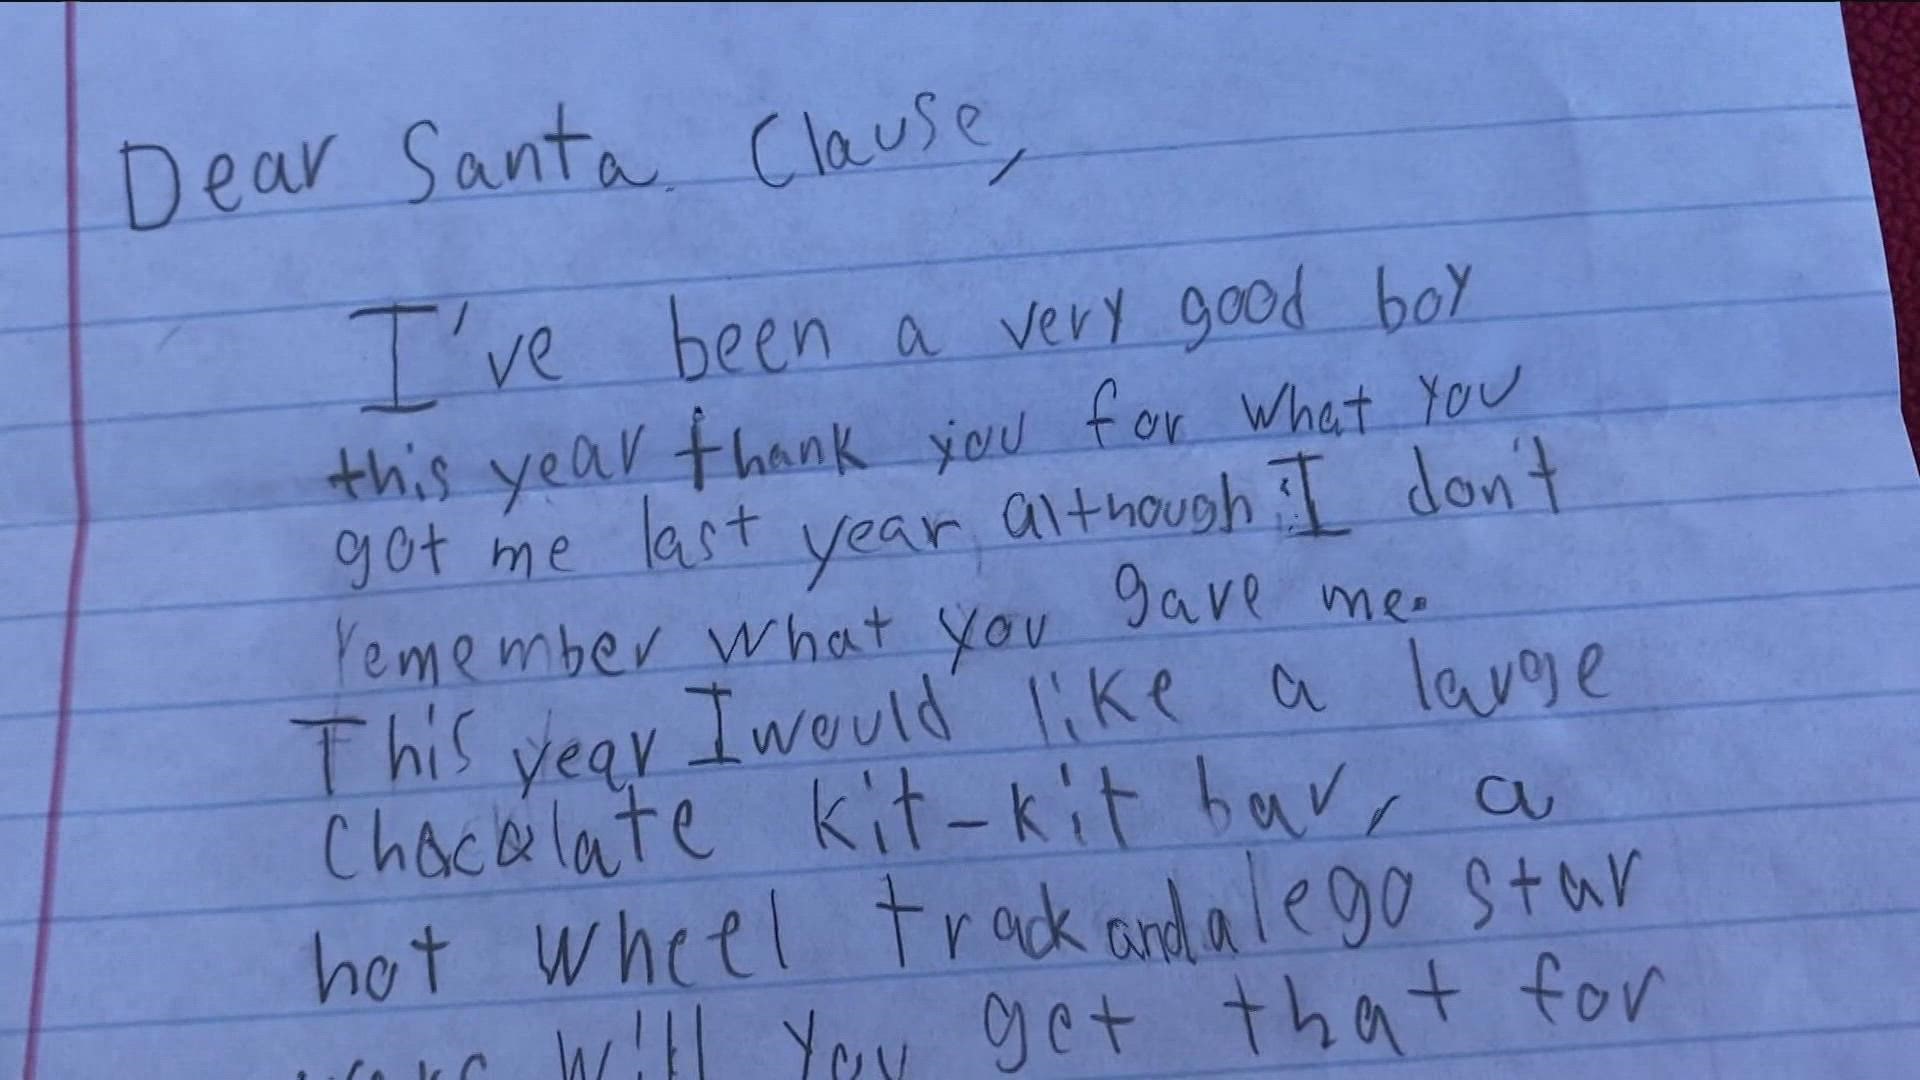 “This year for Christmas, I want my mom to be healthy. And that is all I want. She has had some stuff and I want her to be healthy and safe,” wrote Maxine.